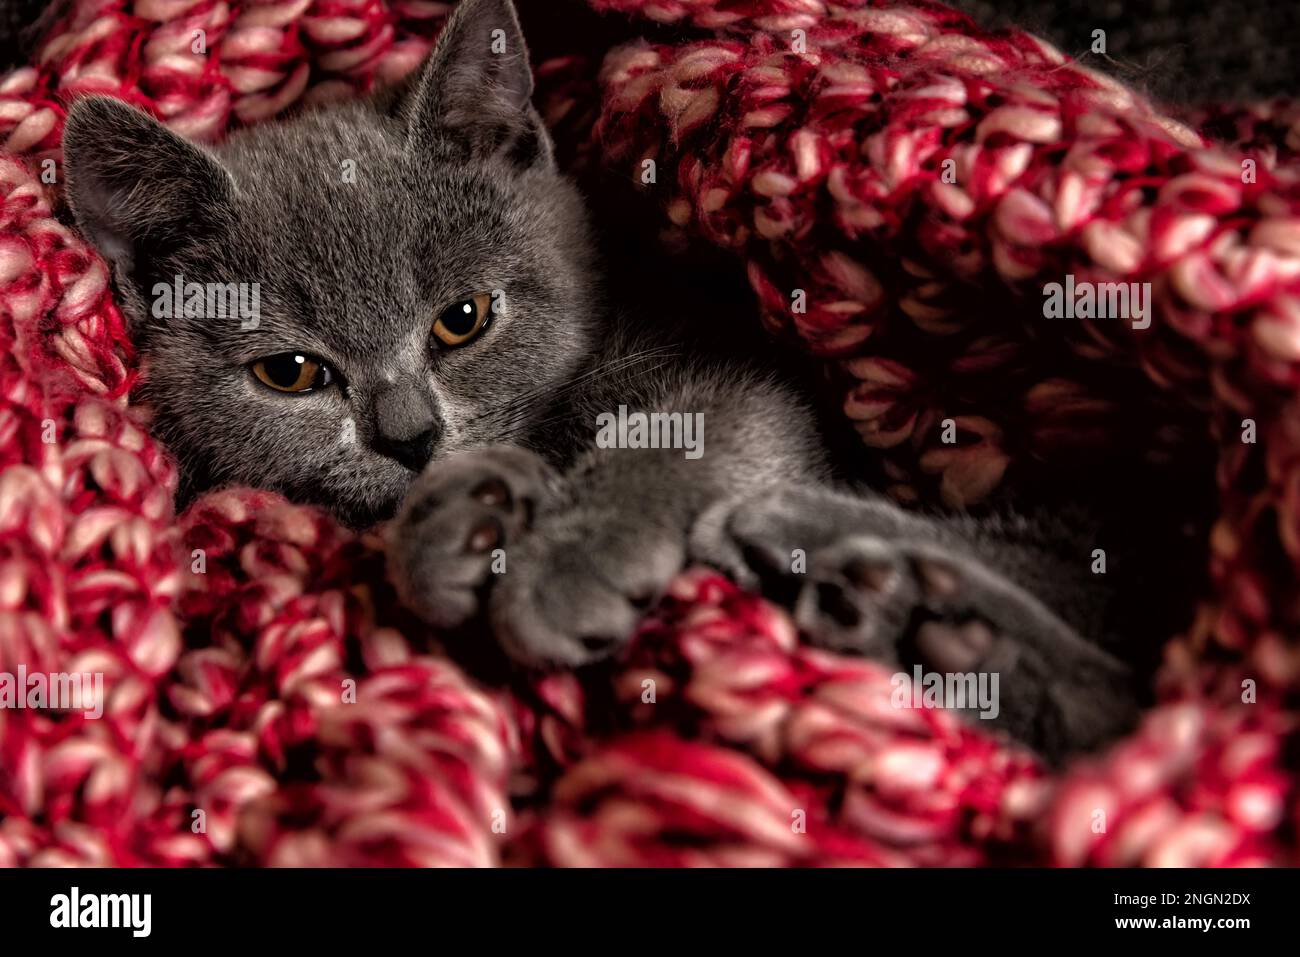 Drowsy little British shorthair kitten staring at the camera wrapped in a red and white blanket Stock Photo